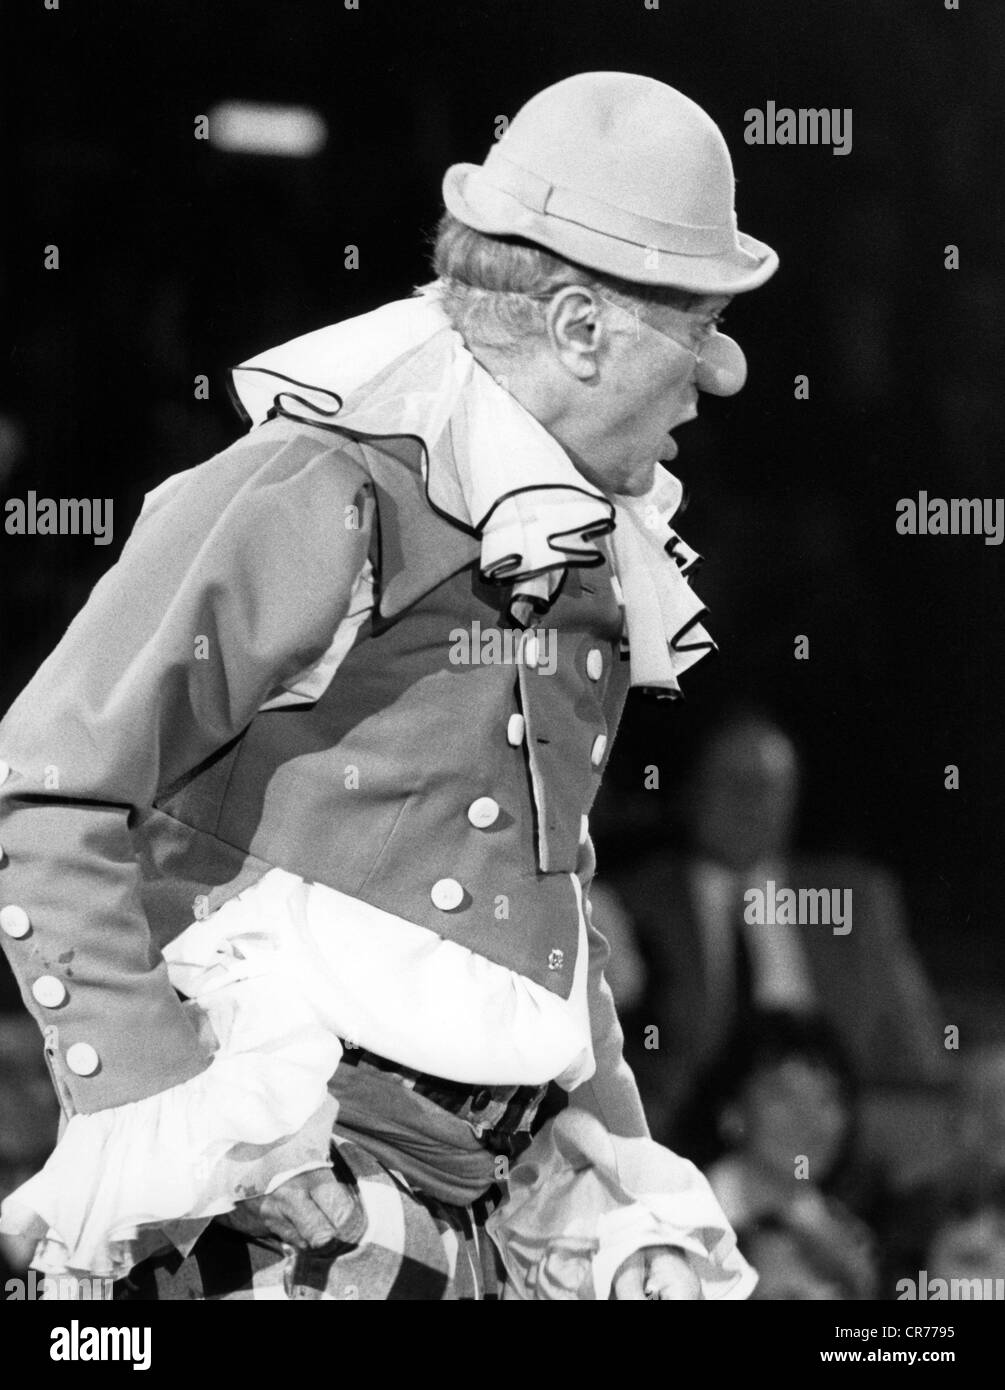 Curtis, Tony, 3.6.1925 - 29.9.2010, US American actor, half length, as clown in the charity show 'Stars in der Manege' (Stars in the arena), Circus Krone, Munich, Germany, December 1985, , Stock Photo